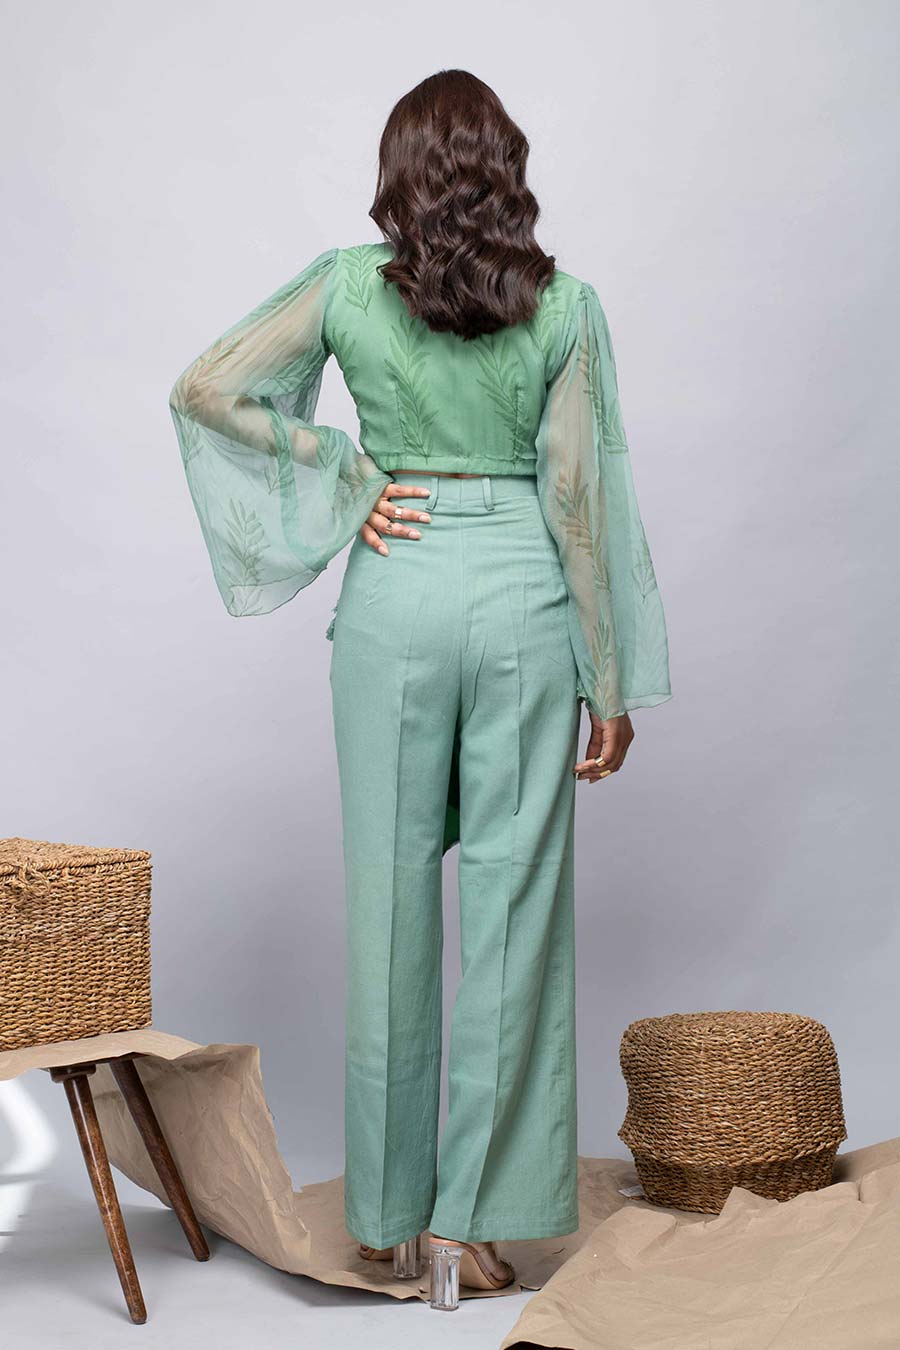 PANSY - Green Top & Pant Co-Ord Set